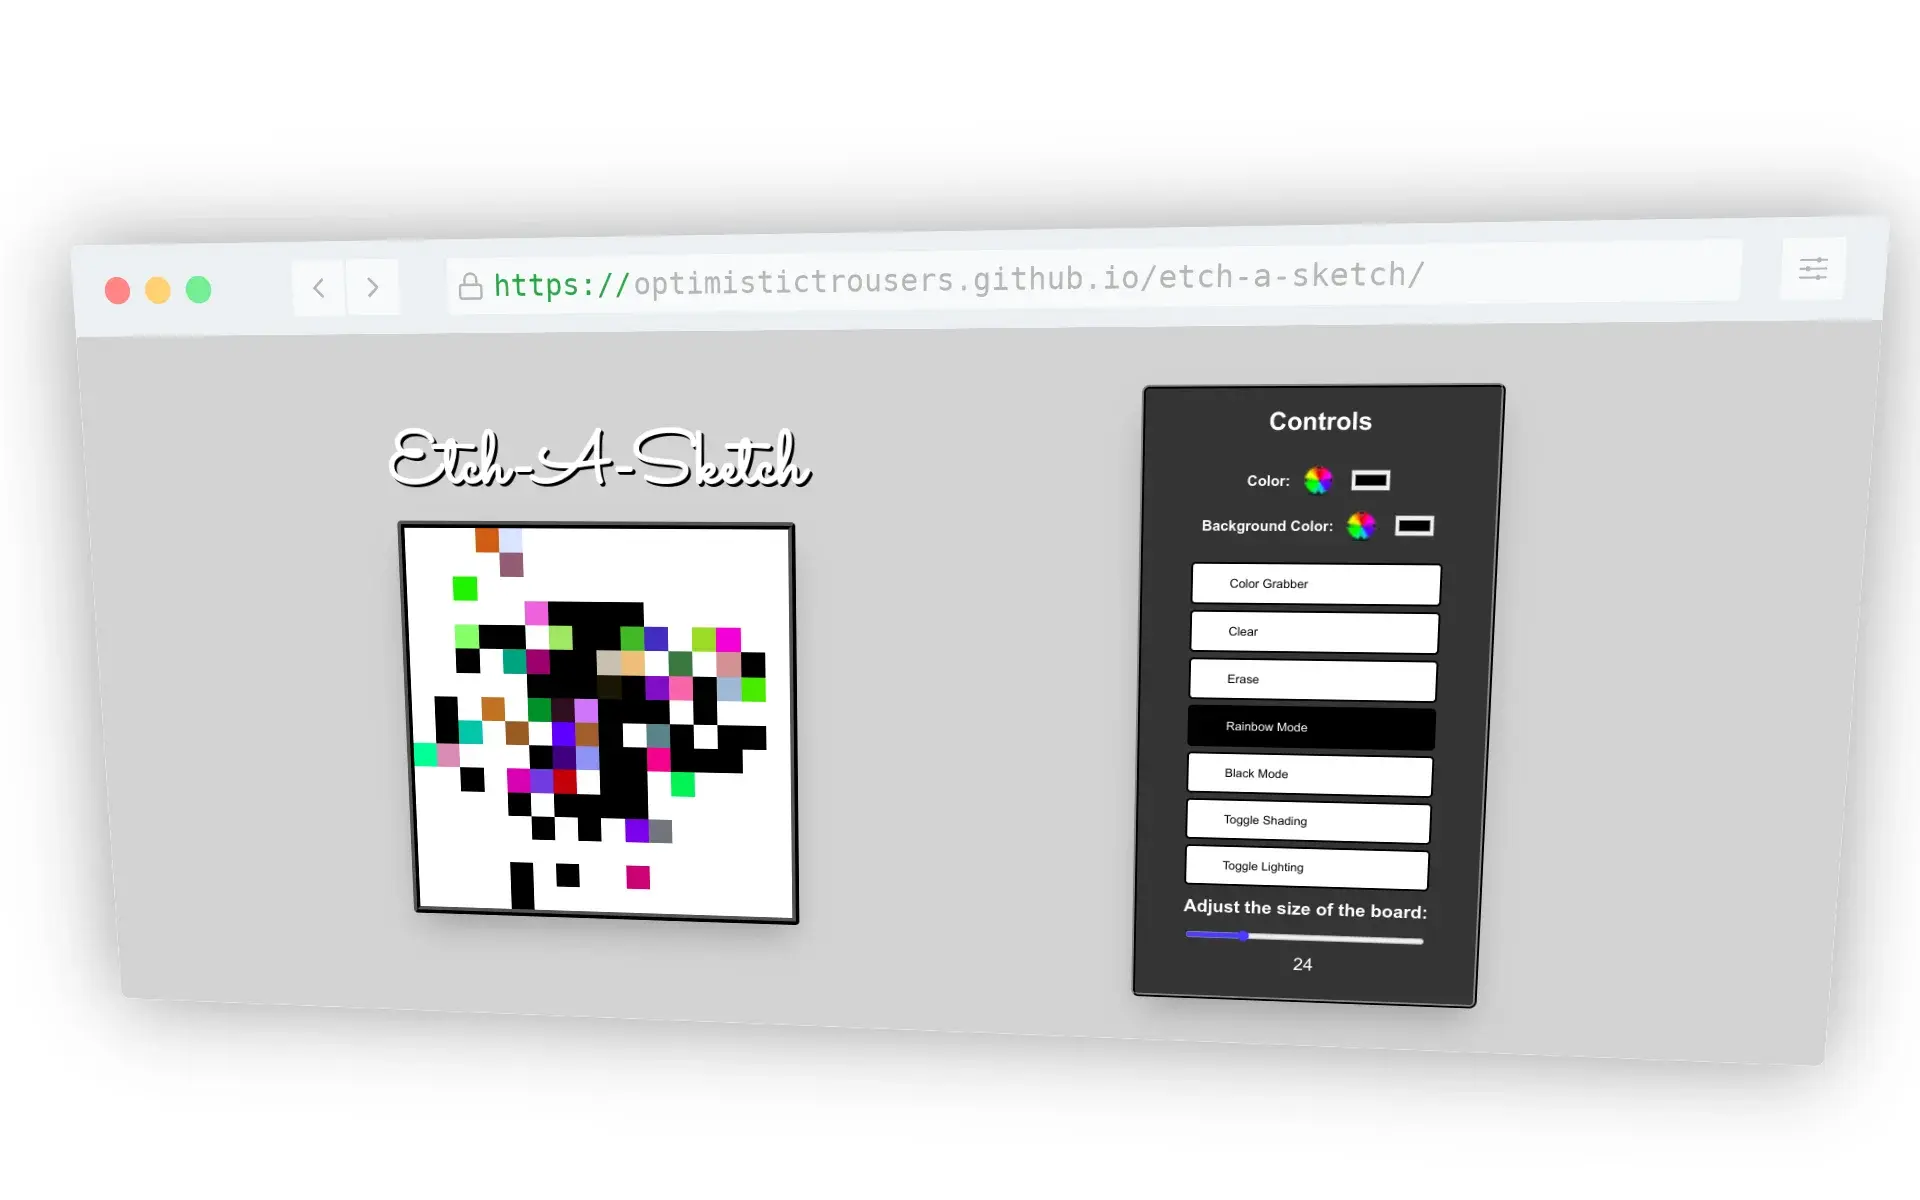 Screenshot of an 'Etch-A-Sketch' web application opened in a browser. The main section shows a pixelated multi-colored drawing. On the right, there's a control panel with various options including color selection, background color, and modes like 'Rainbow' and 'Black'. The URL in the browser indicates the website is hosted on GitHub.